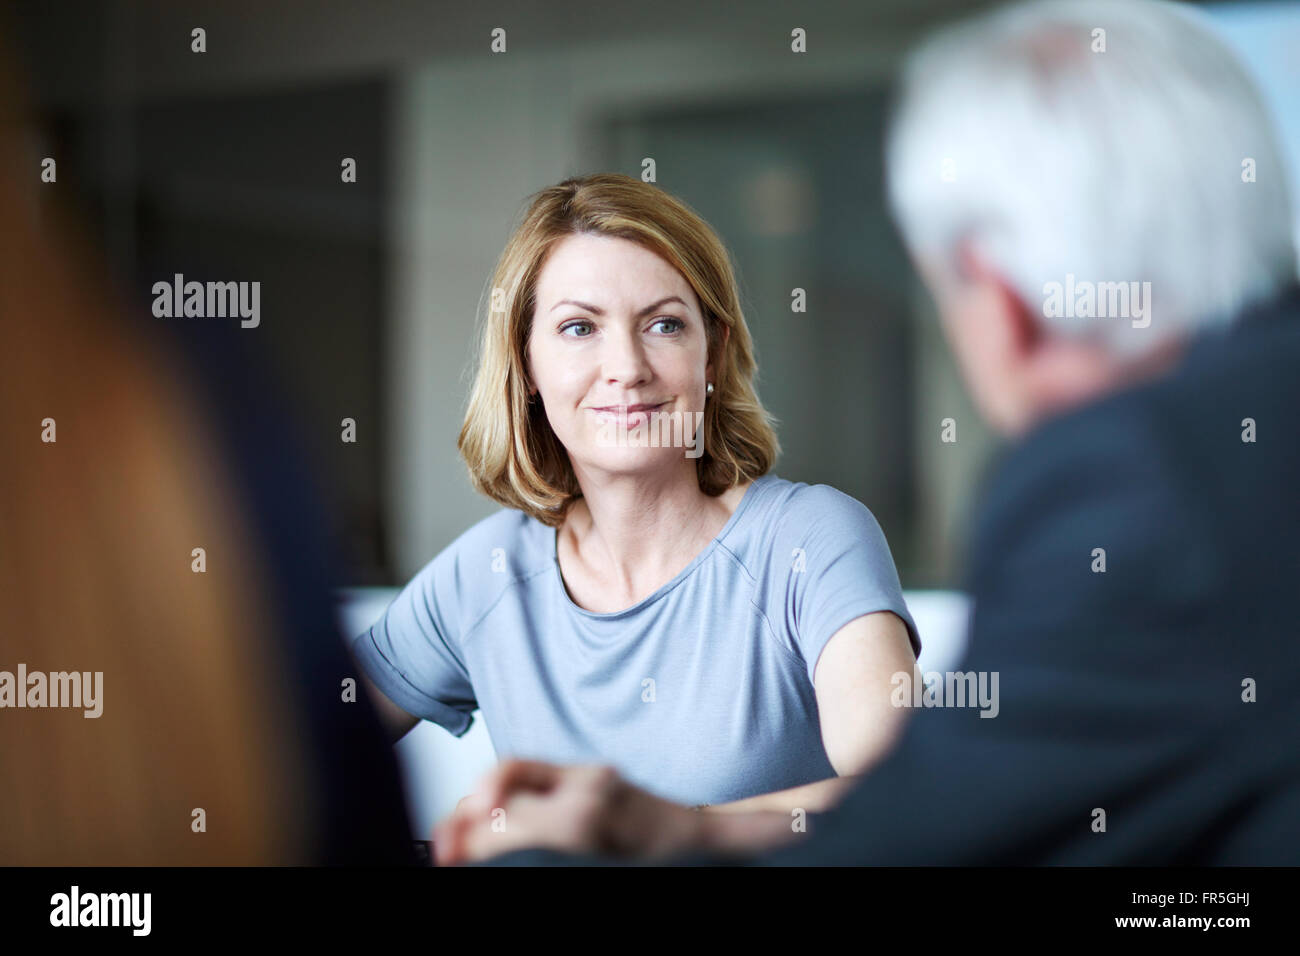 Businesswoman listening to businessman in meeting Banque D'Images